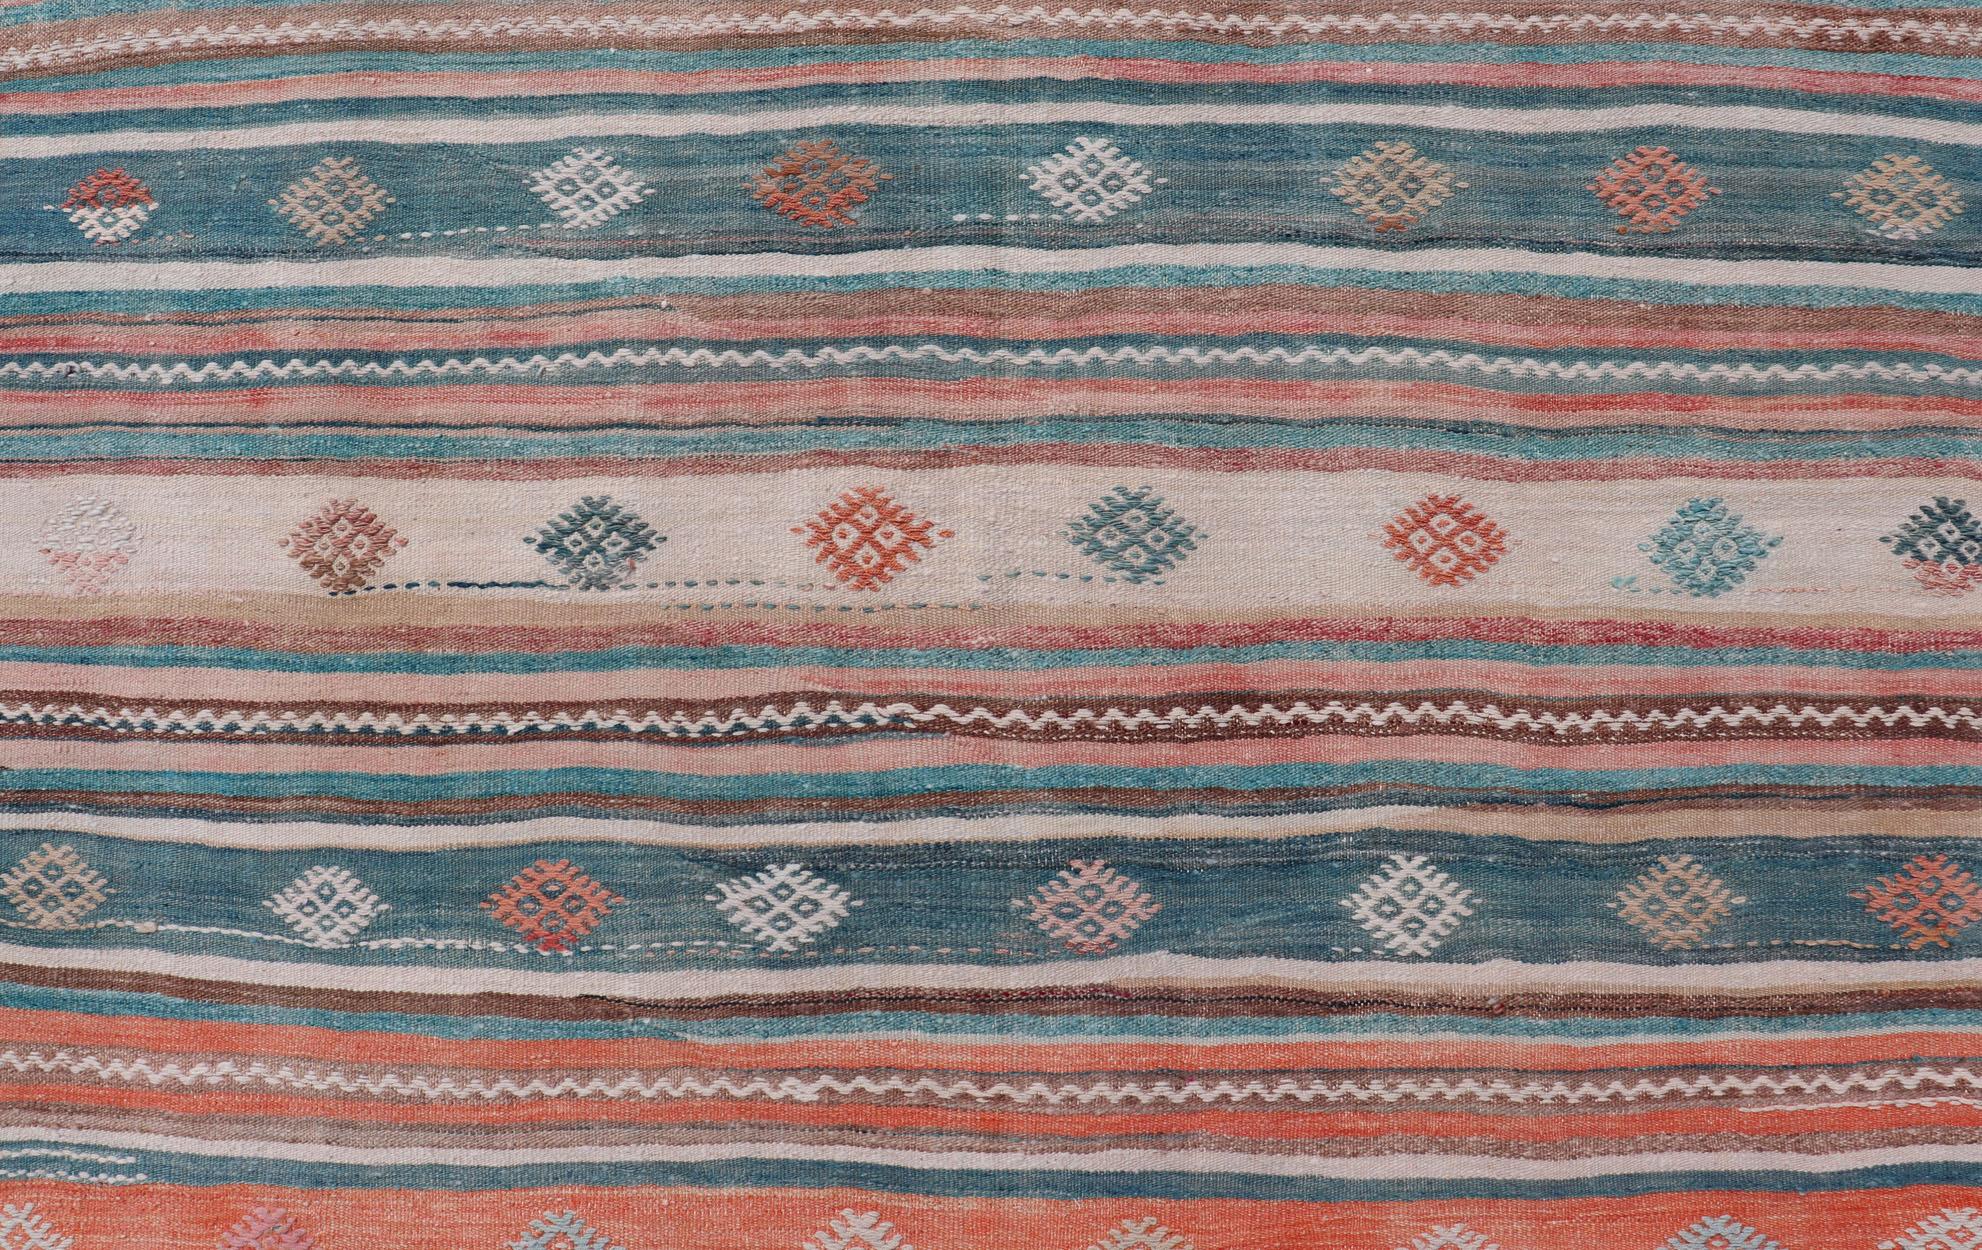 Hand-Woven Colorful Vintage Turkish Embroidered Kilim with Stripes and Geometric Motifs For Sale